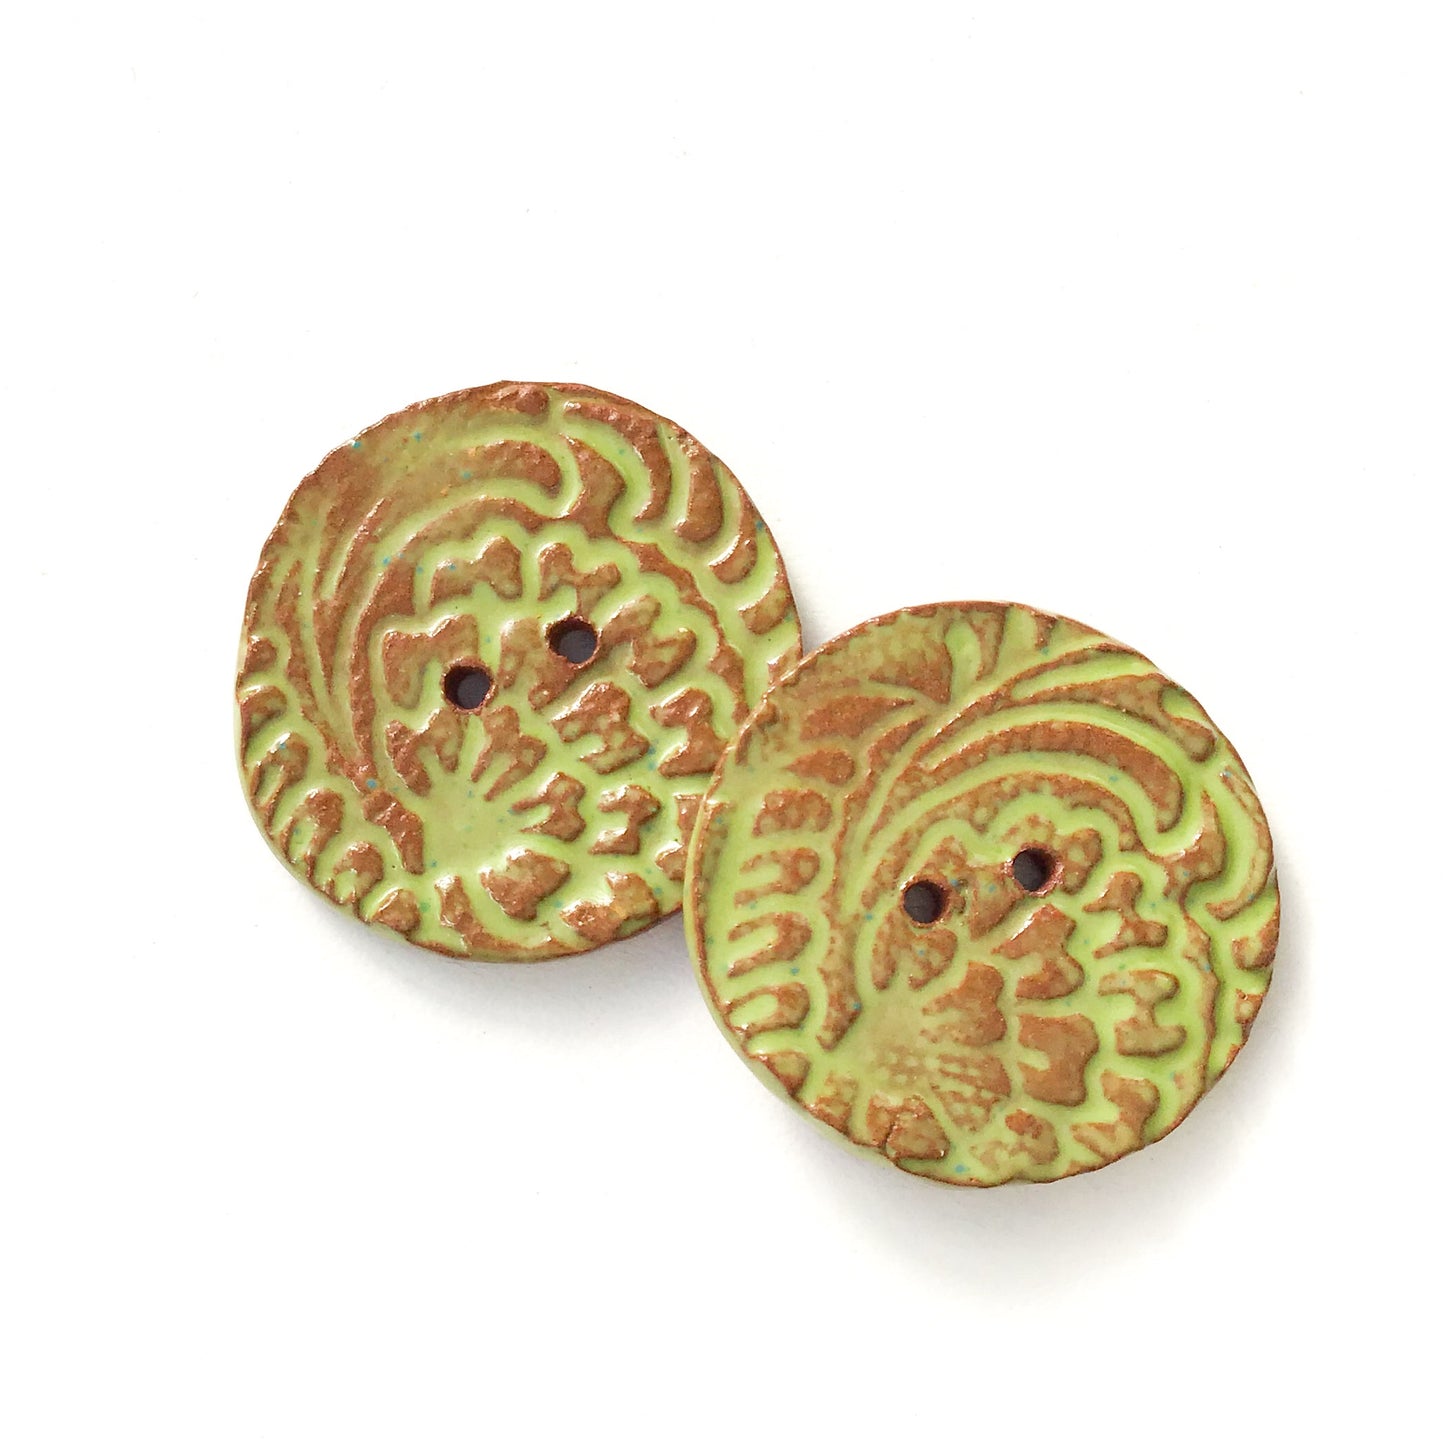 Hand Stamped Speckled Green Ceramic Buttons on Red Clay - 1 1/8" - 2 Pack